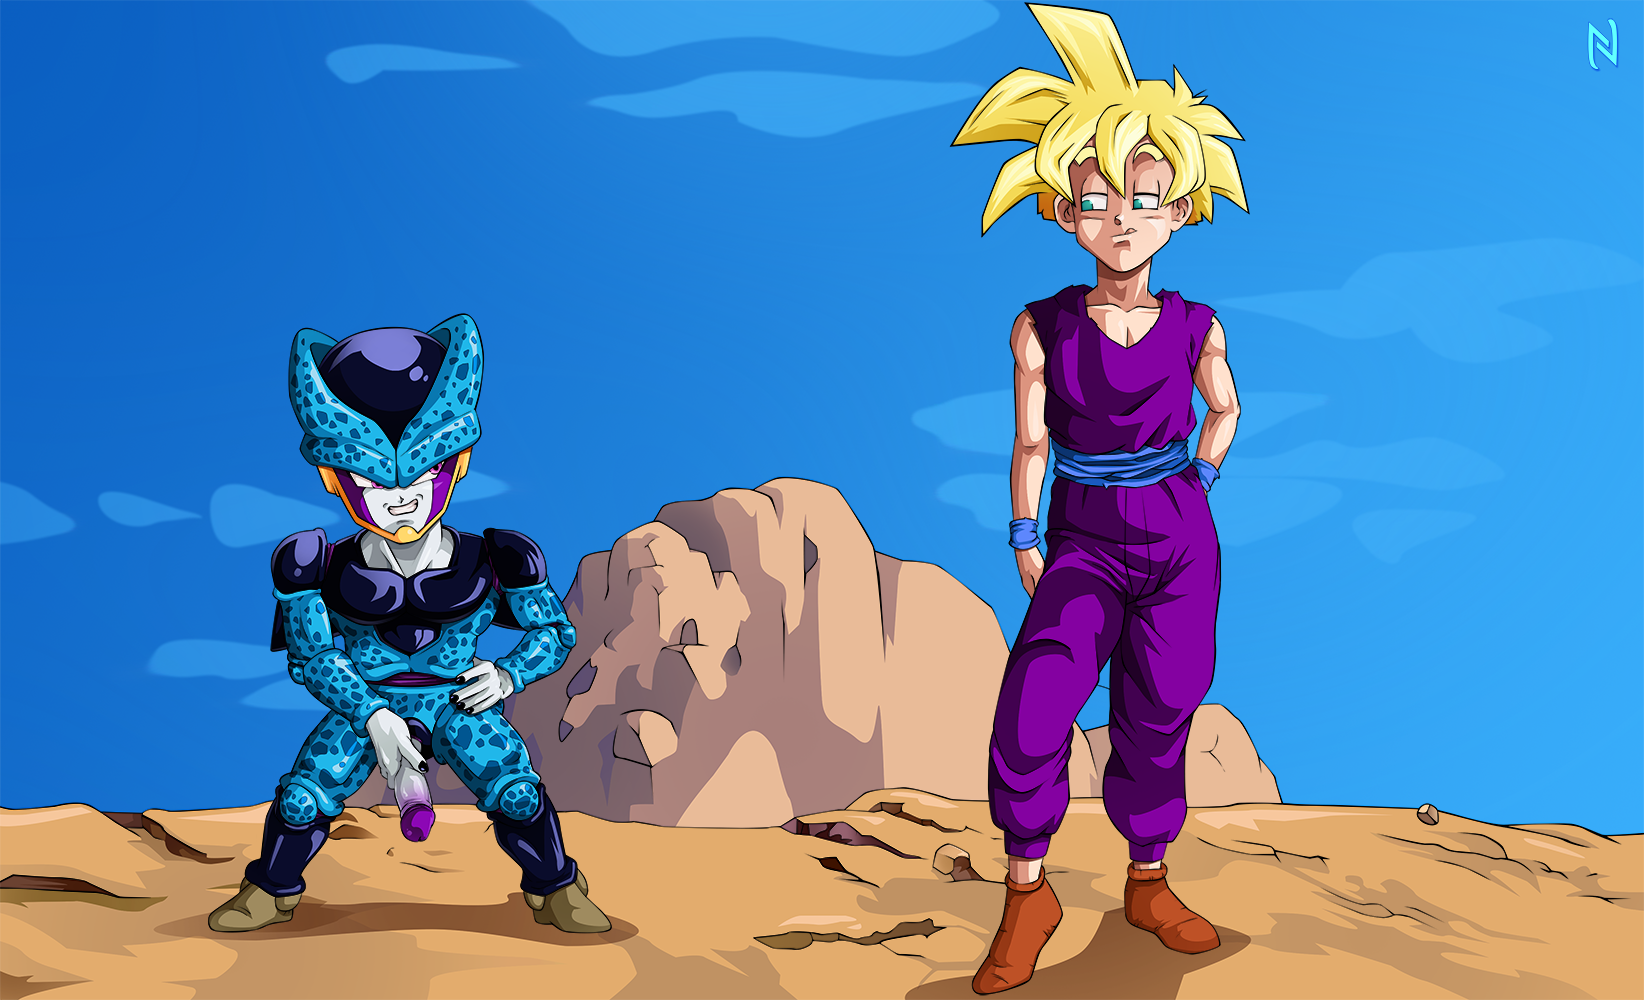 Cell Jr. and Gohan Part 2. Posts by Nearphotison. 